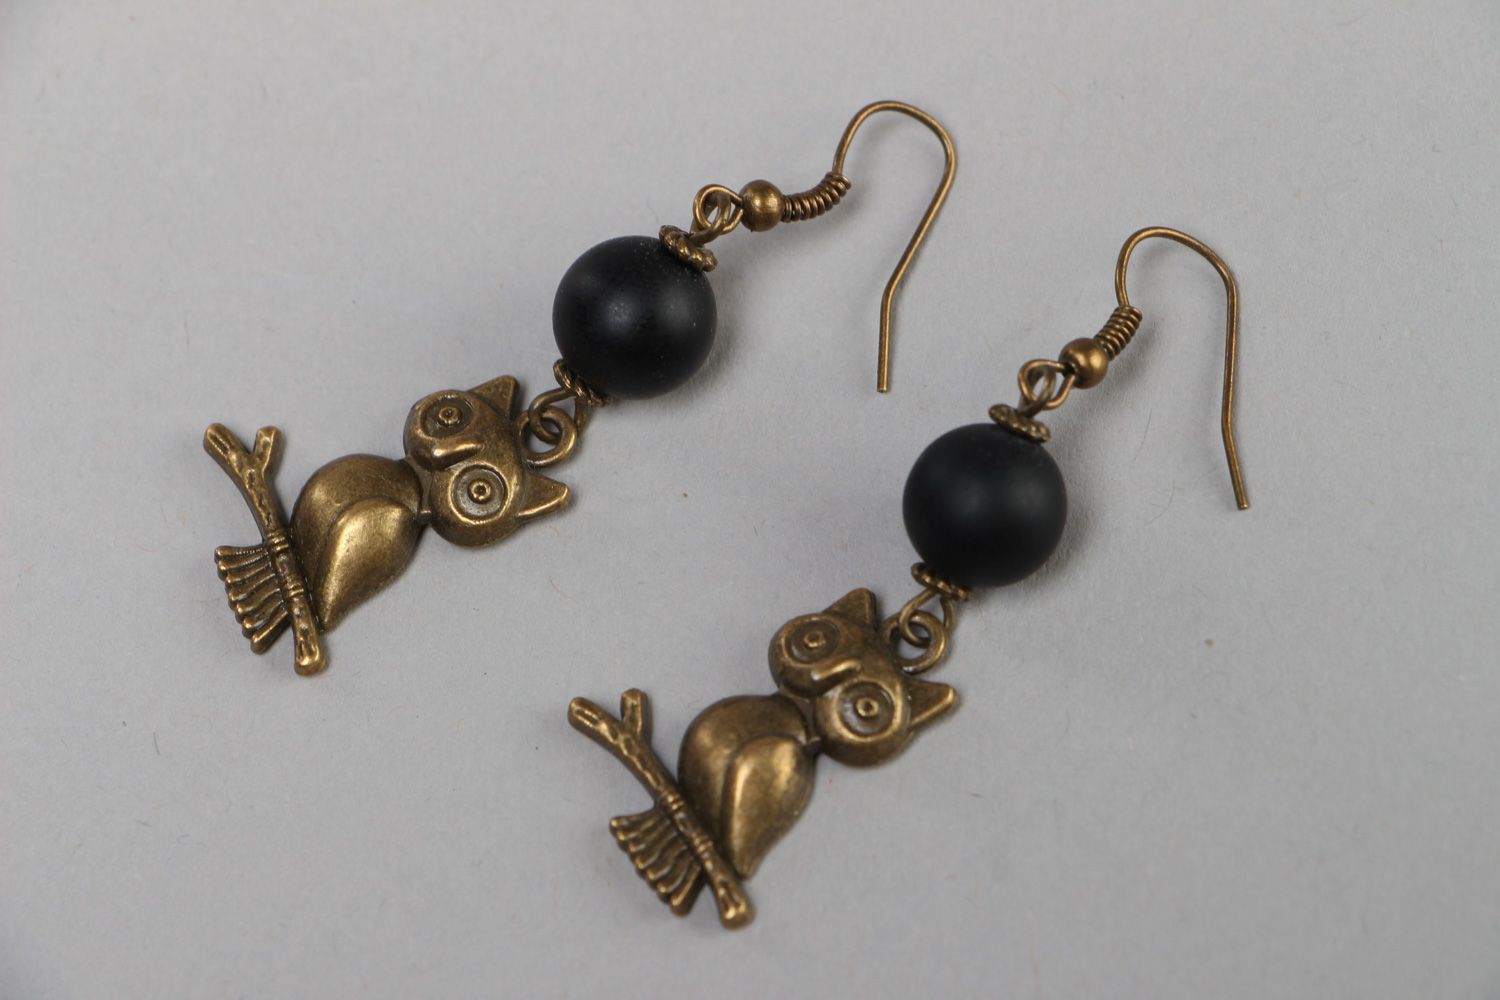 Handmade dangle earrings with shungite beads and metal charms in the shape of owls photo 1